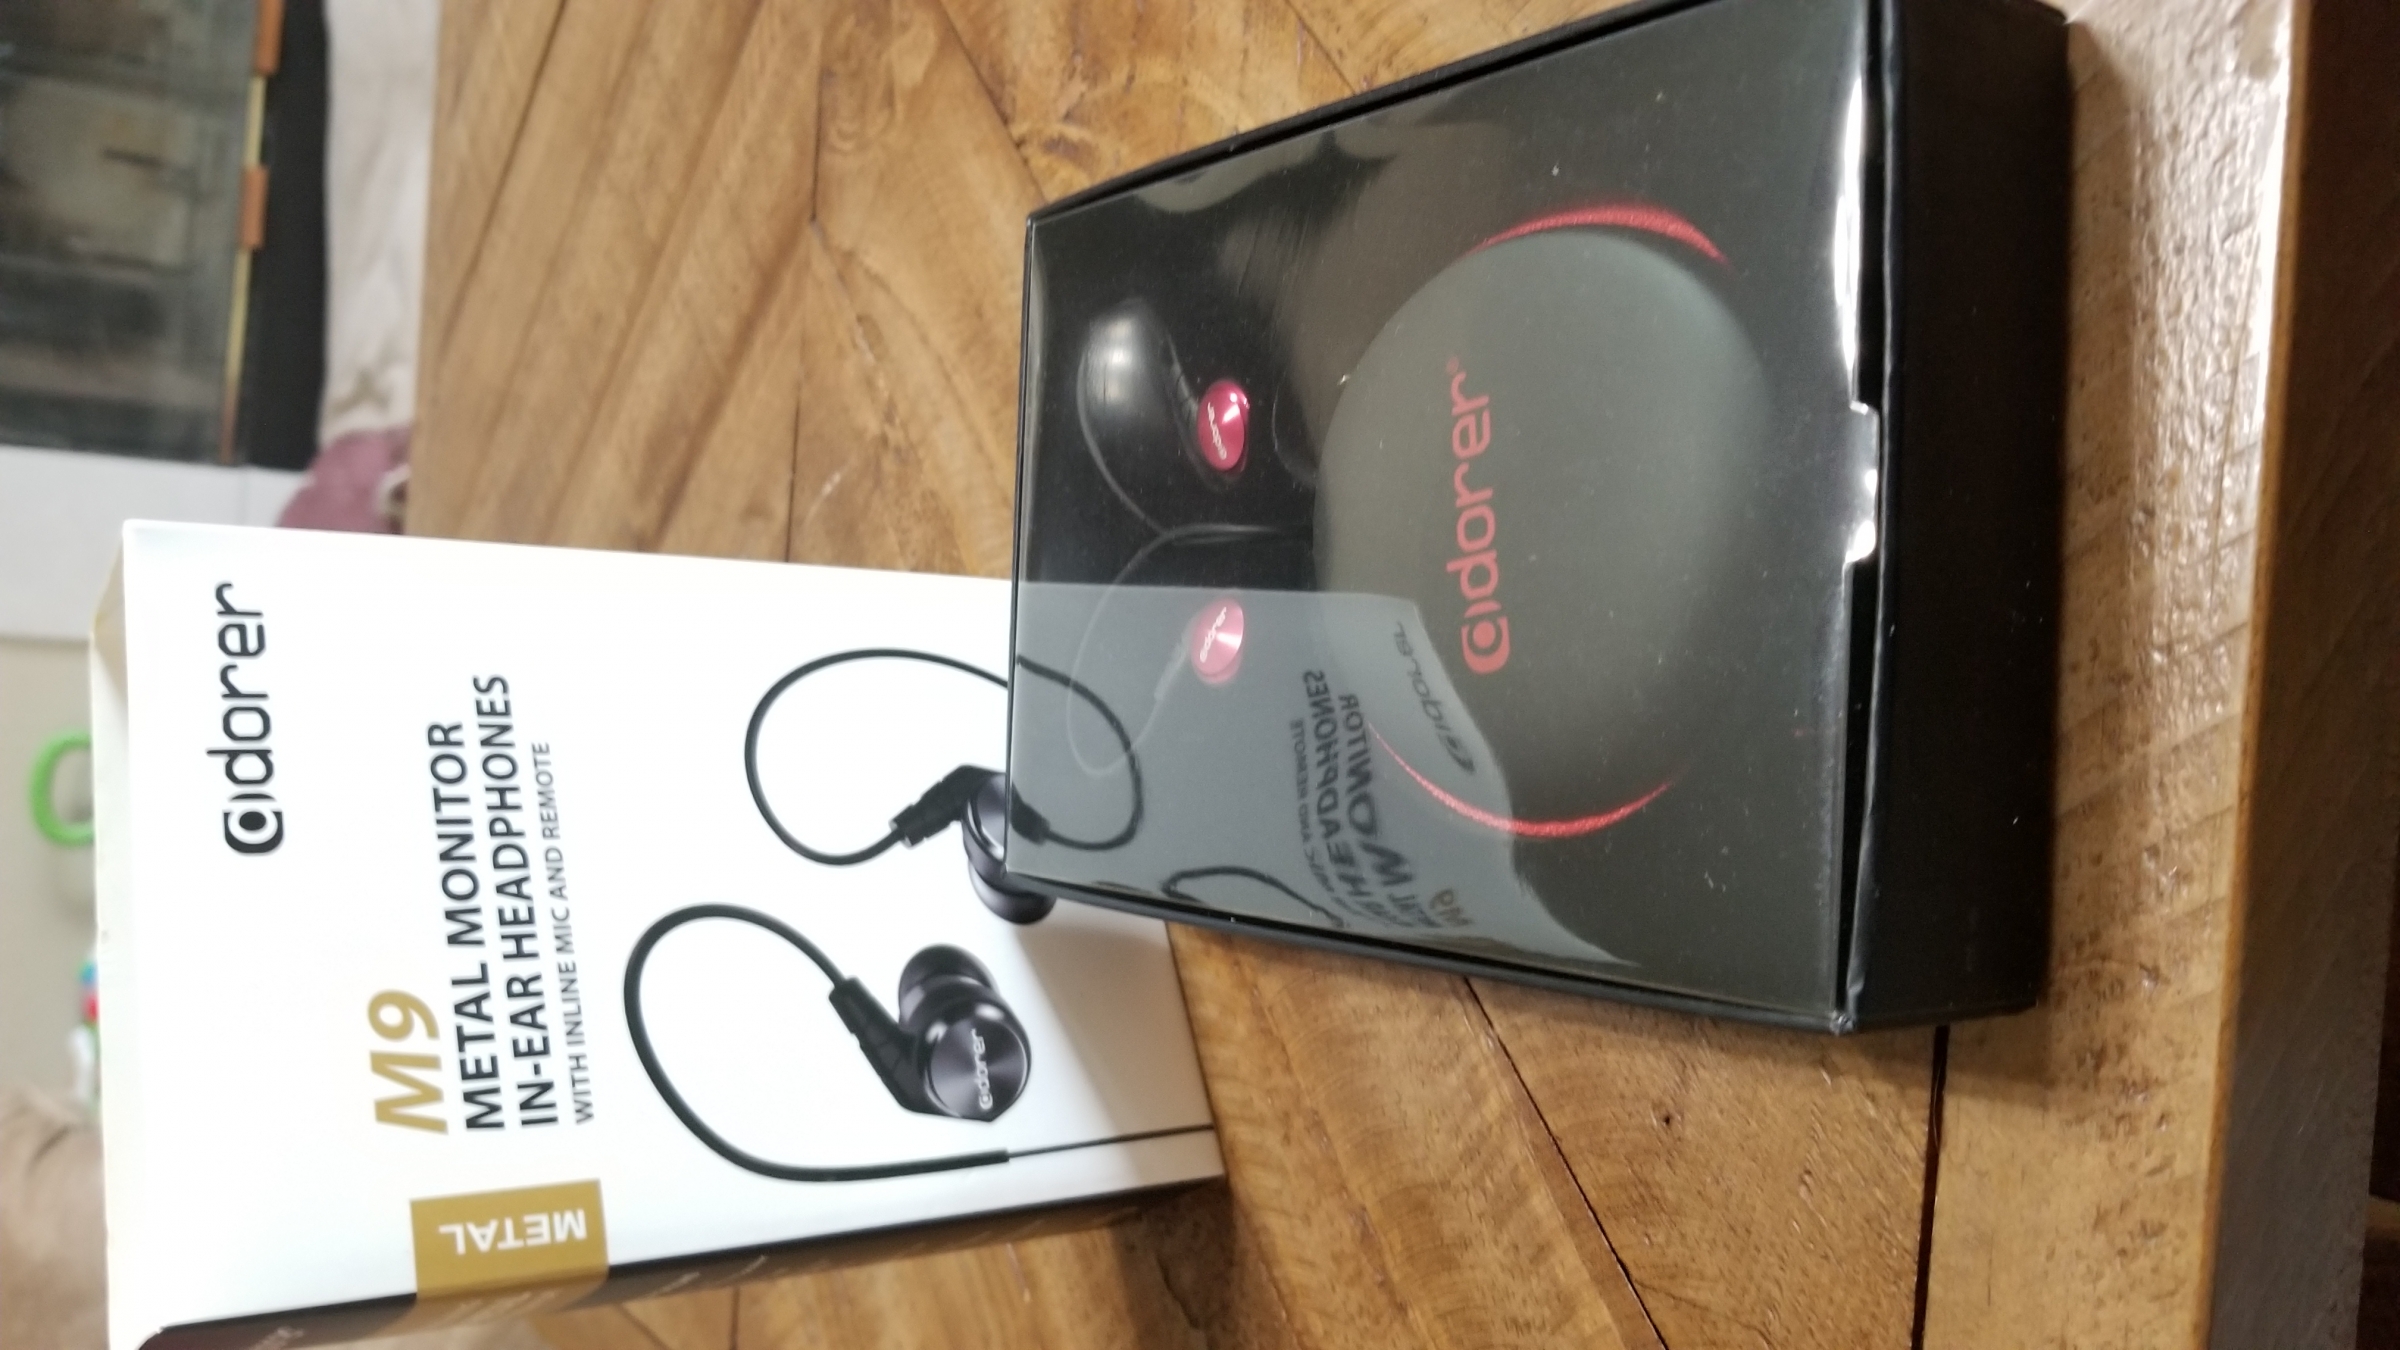 The best earbuds yet